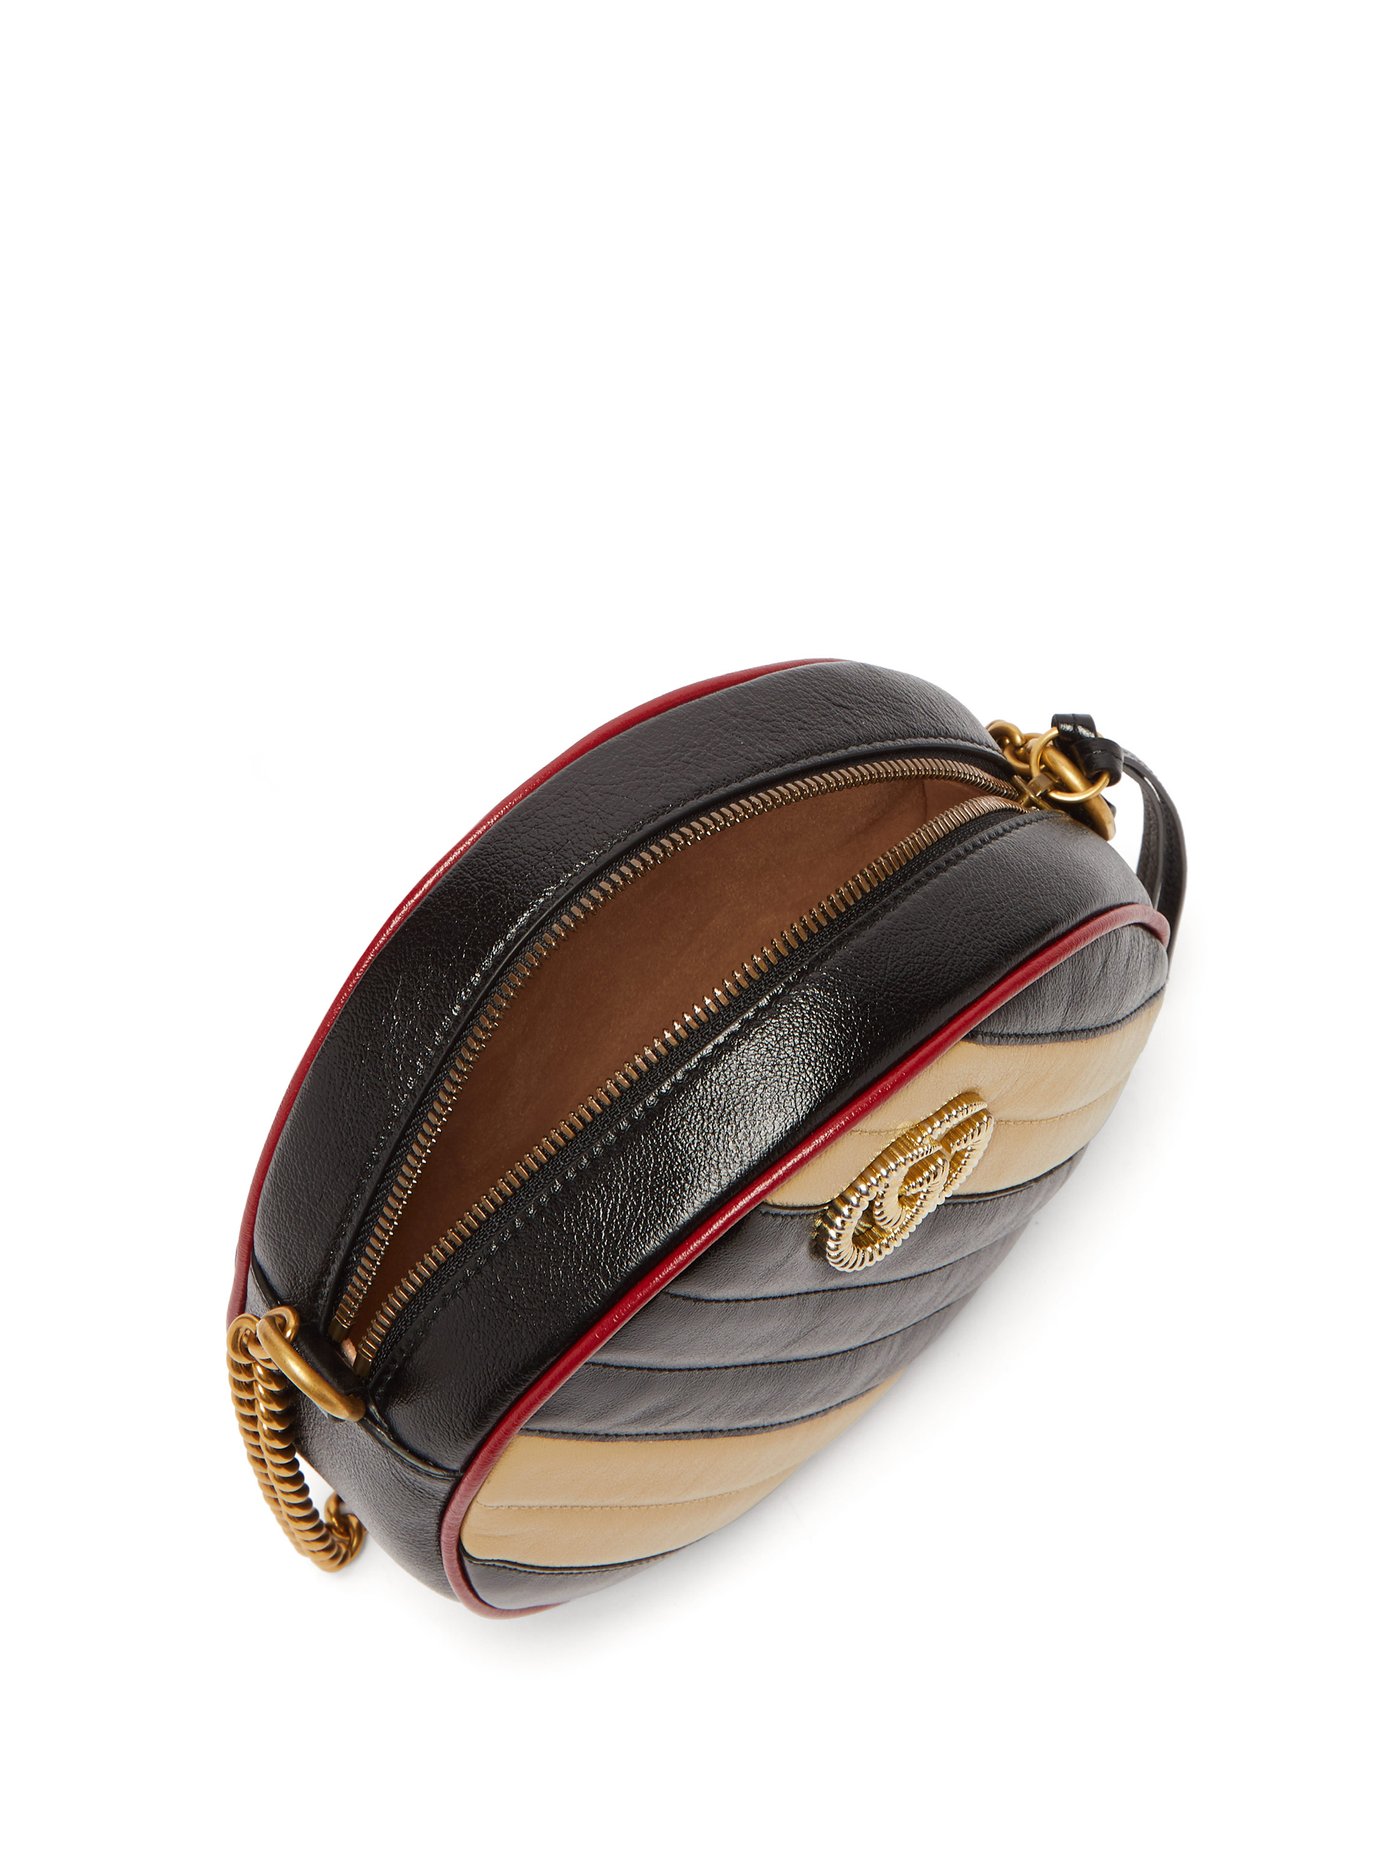 Gucci Gg Marmont Circular Leather Cross-body Bag In Black Beige | ModeSens